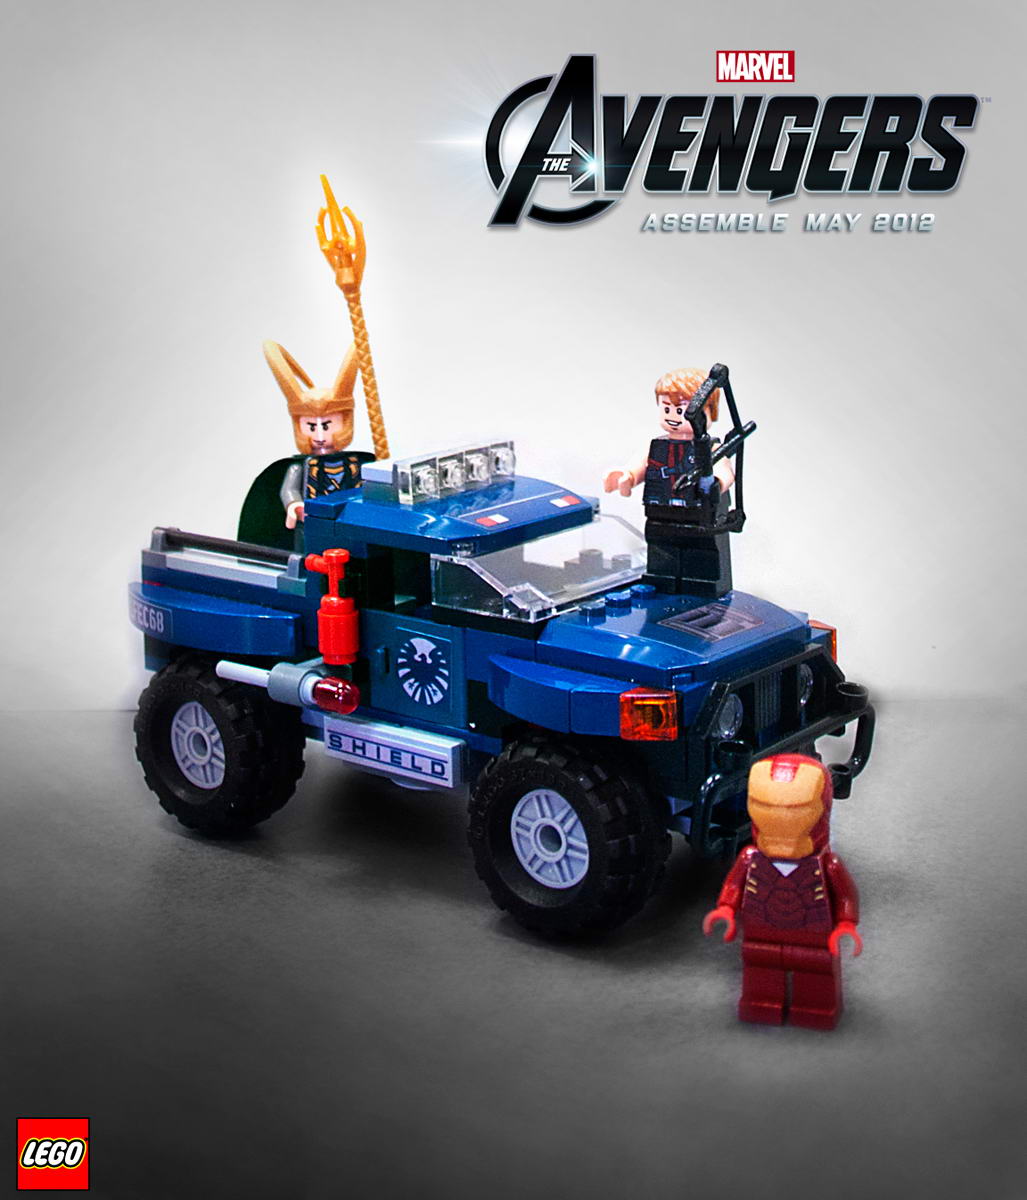 LEGO gosSIP: 130212 LEGO Avengers first look pictures